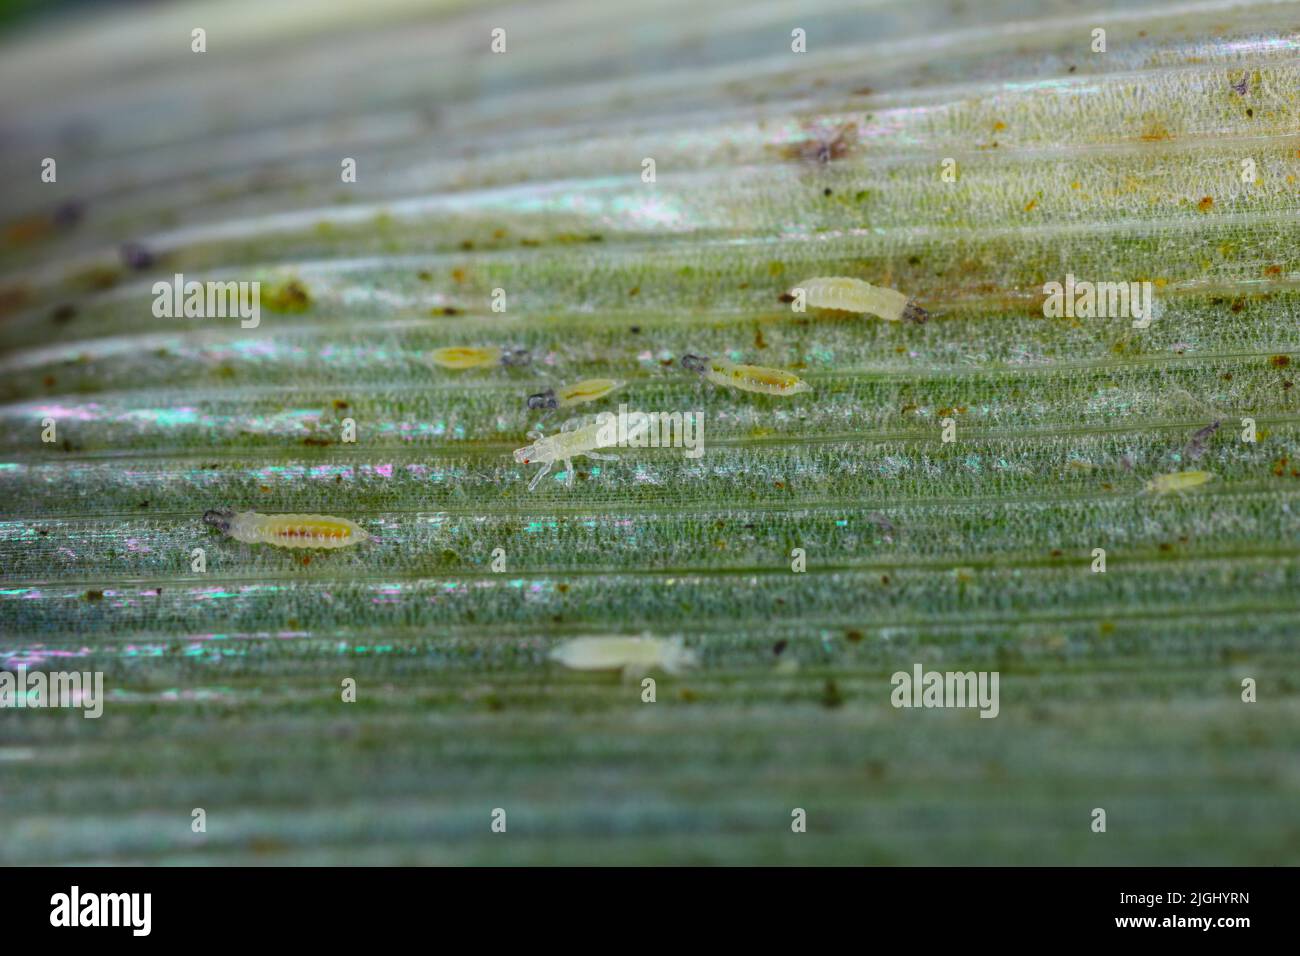 Thrips on cereals. They are economically important pests of various plants. Stock Photo